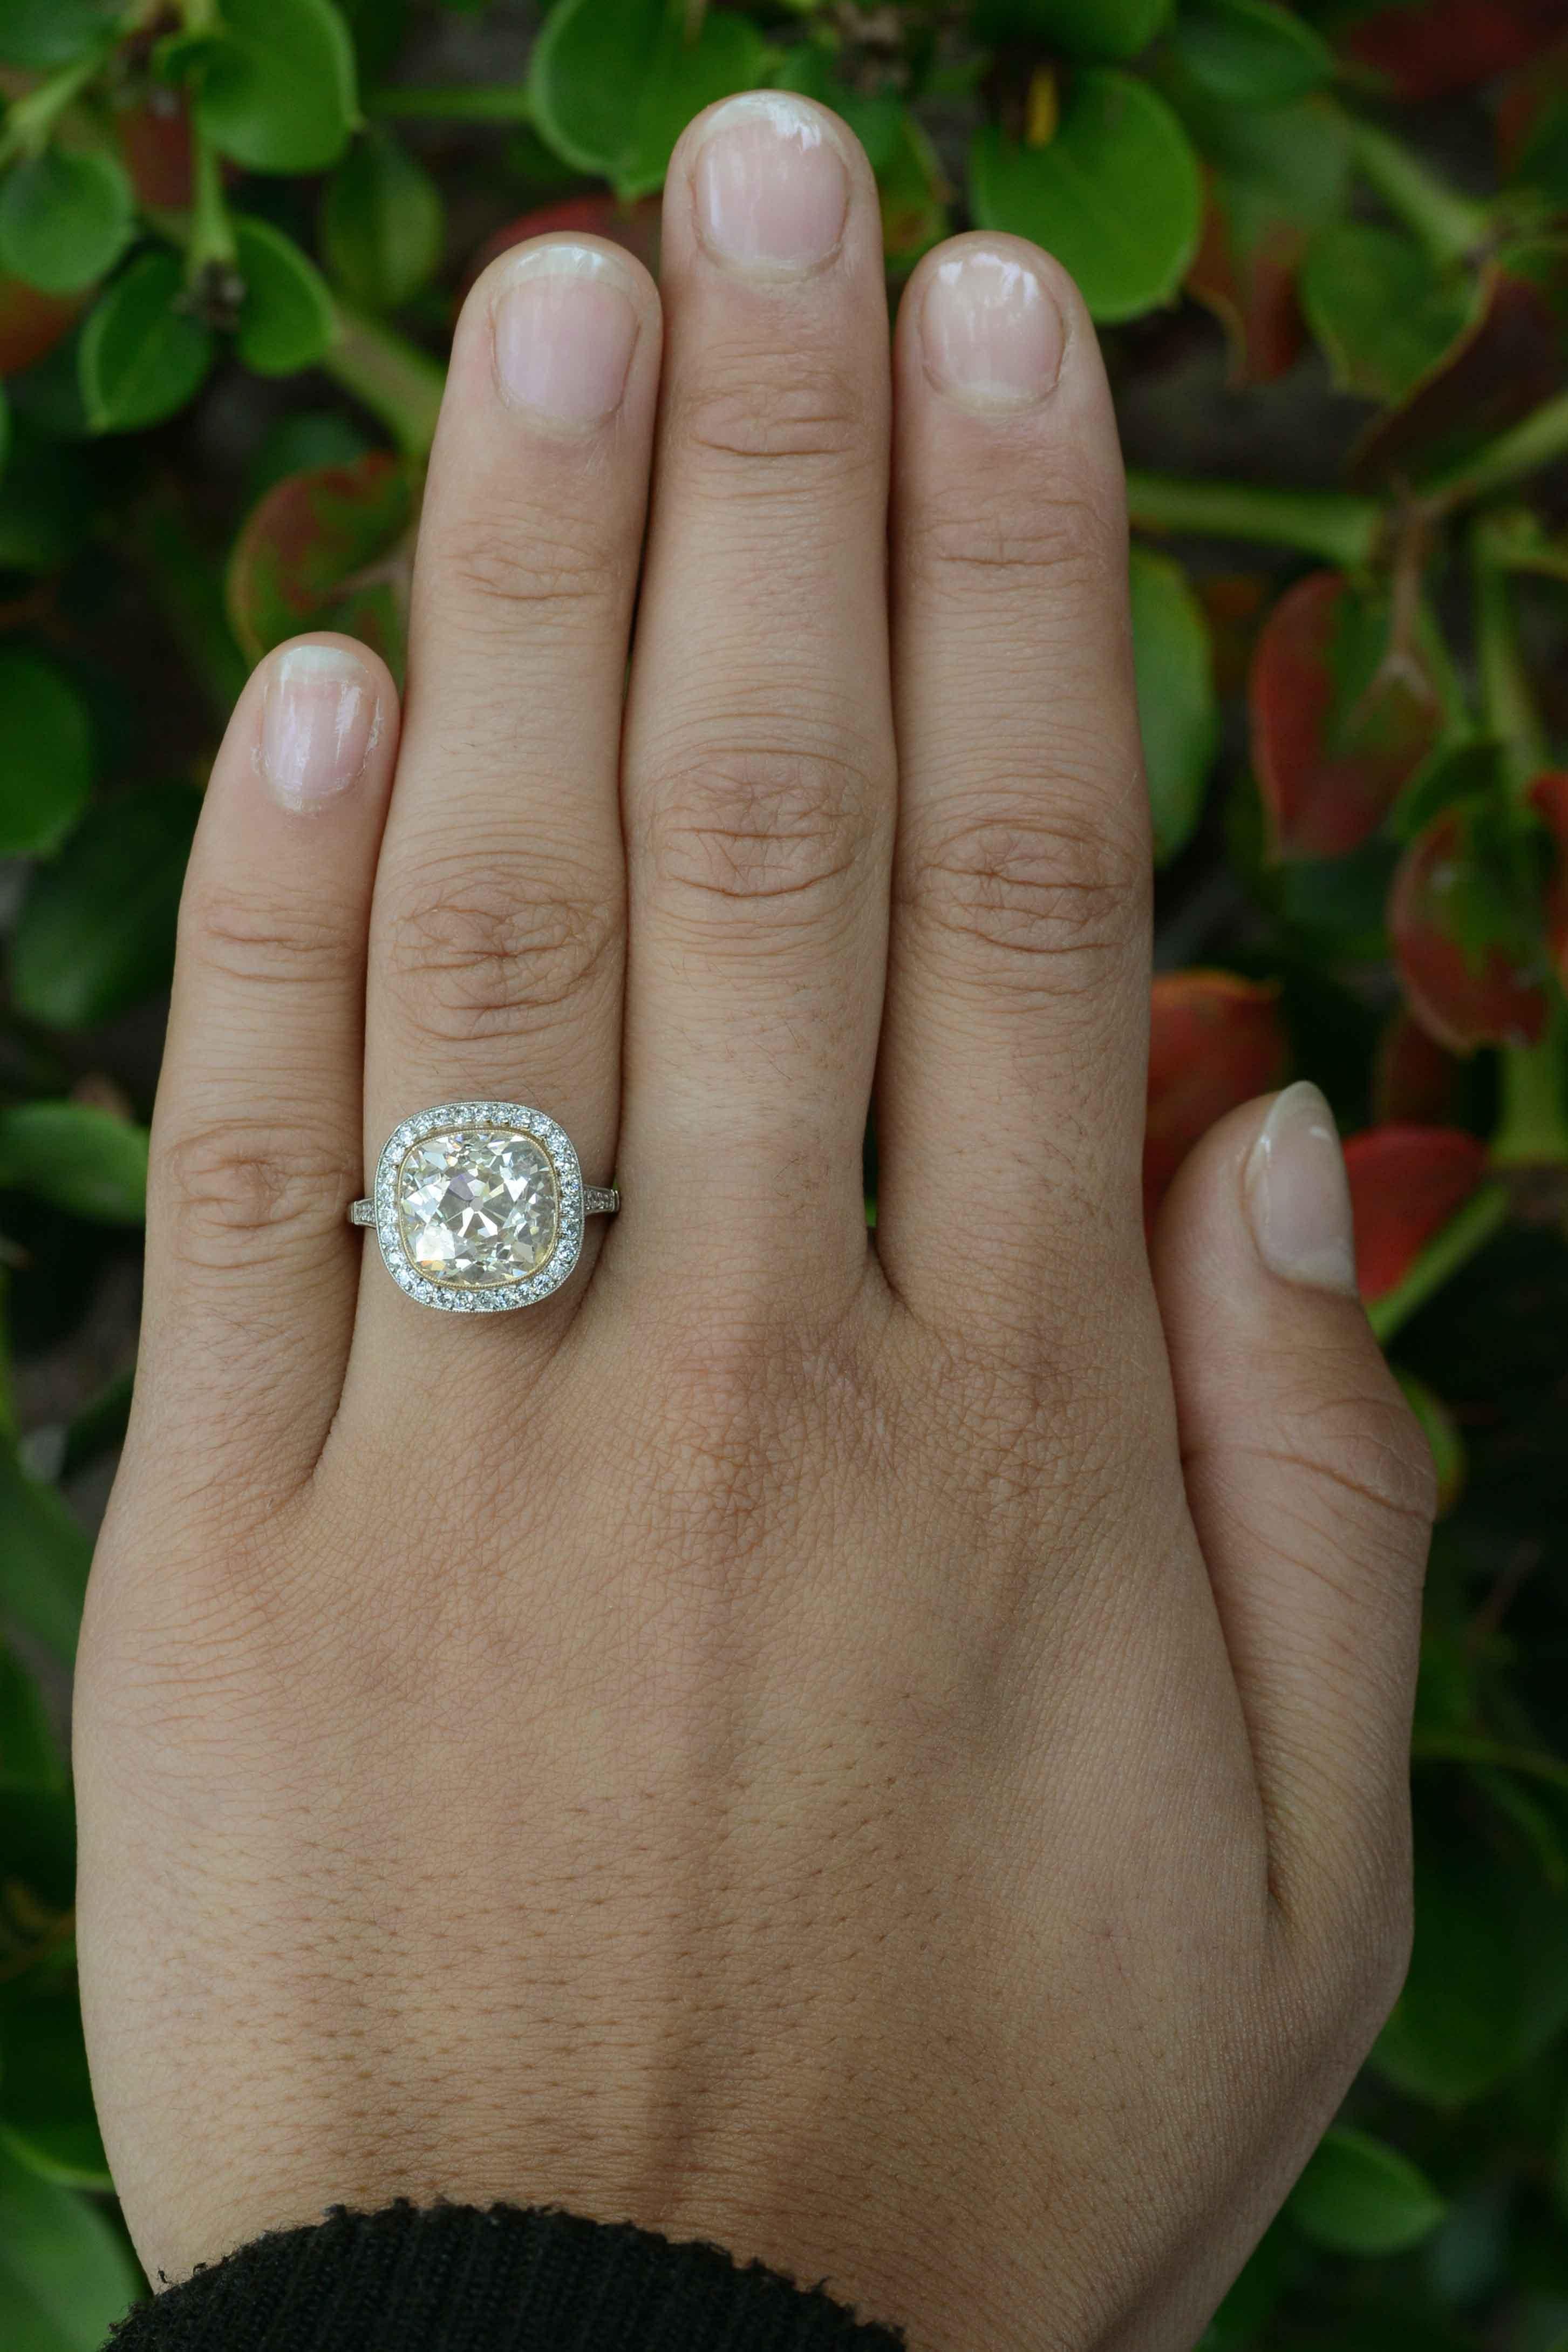 Centering on a massive, 5.51 Carat antique yellow diamond, this Edwardian style engagement ring was hand fabricated in platinum using the original gems from a well-loved but worn antique engagement ring. The chunky facets and high crown of this old,